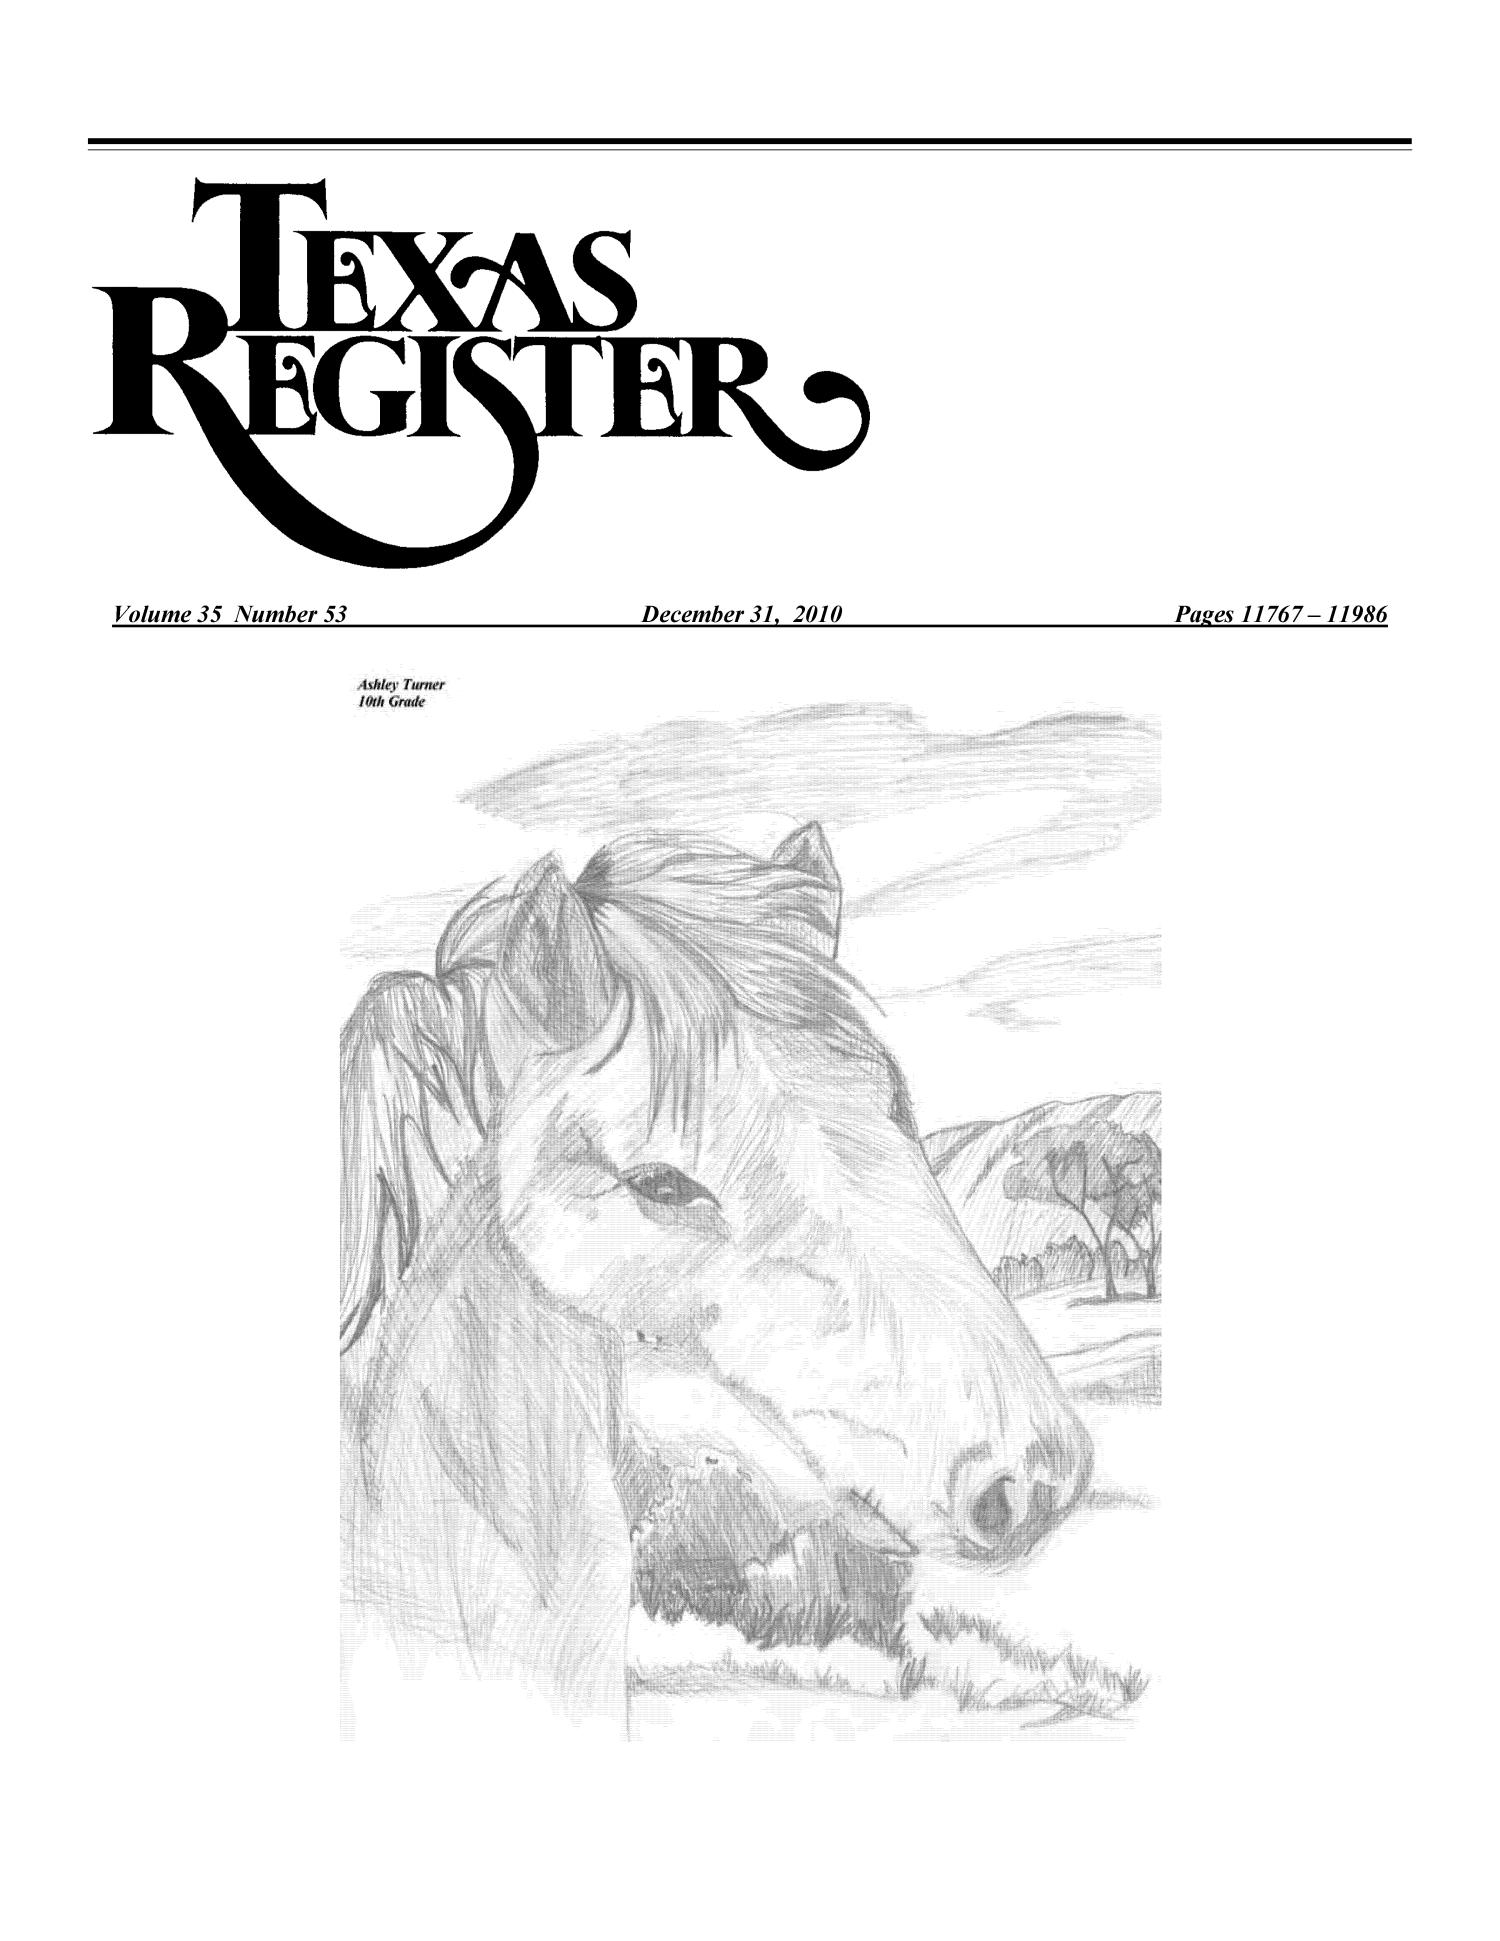 Texas Register, Volume 35, Number 53, Pages 11767-11986, December 31, 2010
                                                
                                                    Title Page
                                                